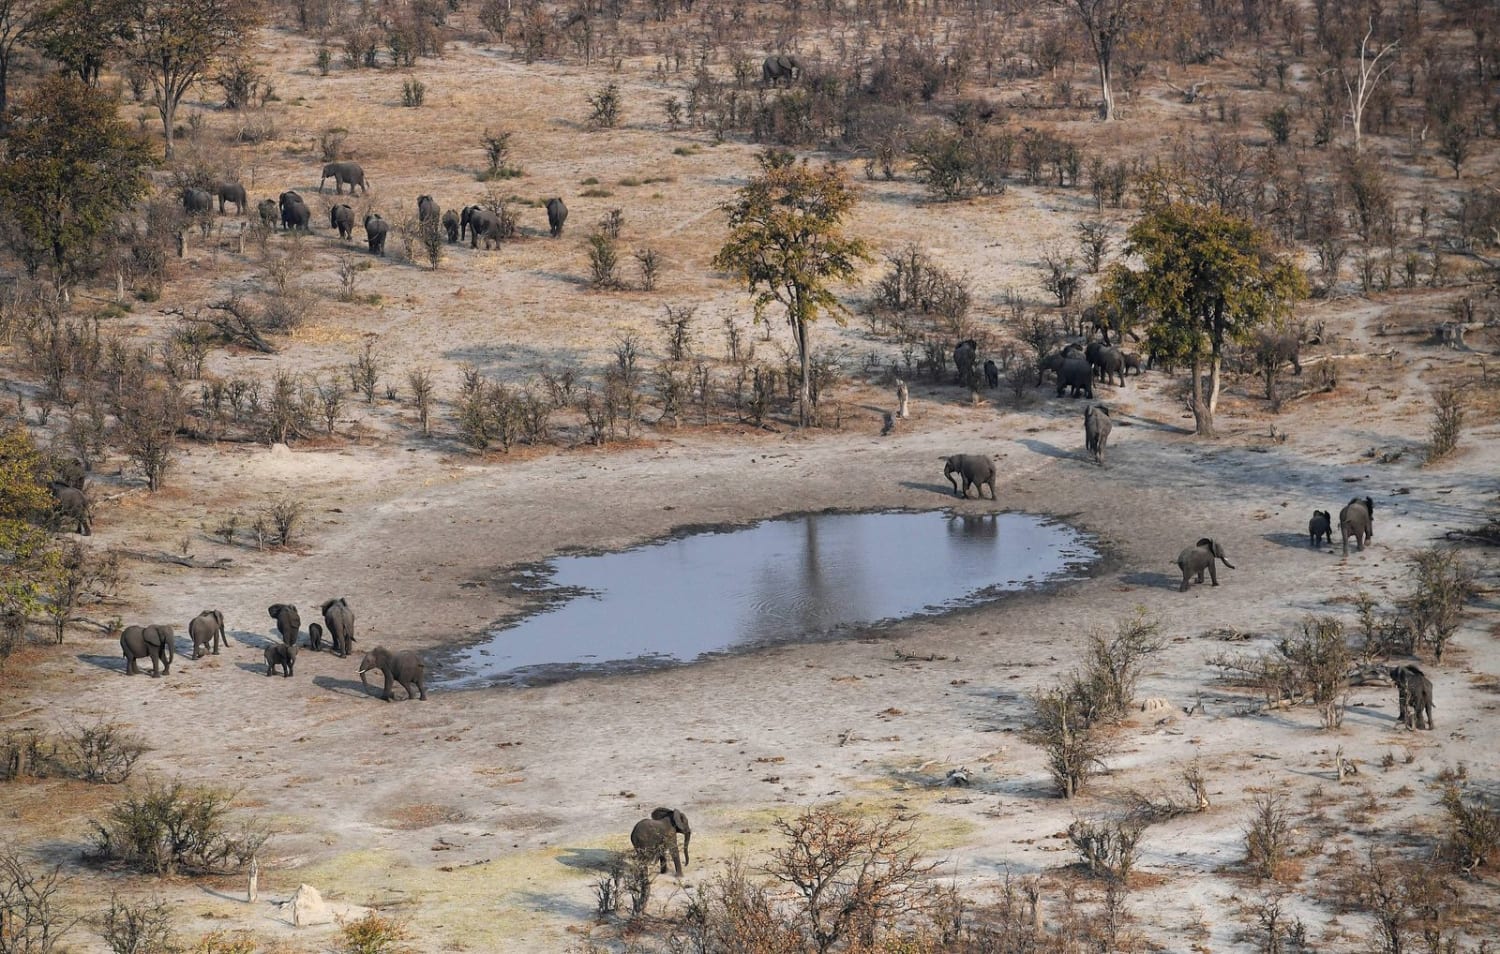 Toxic Algae Caused Mysterious Widespread Deaths of 330 Elephants in Botswana